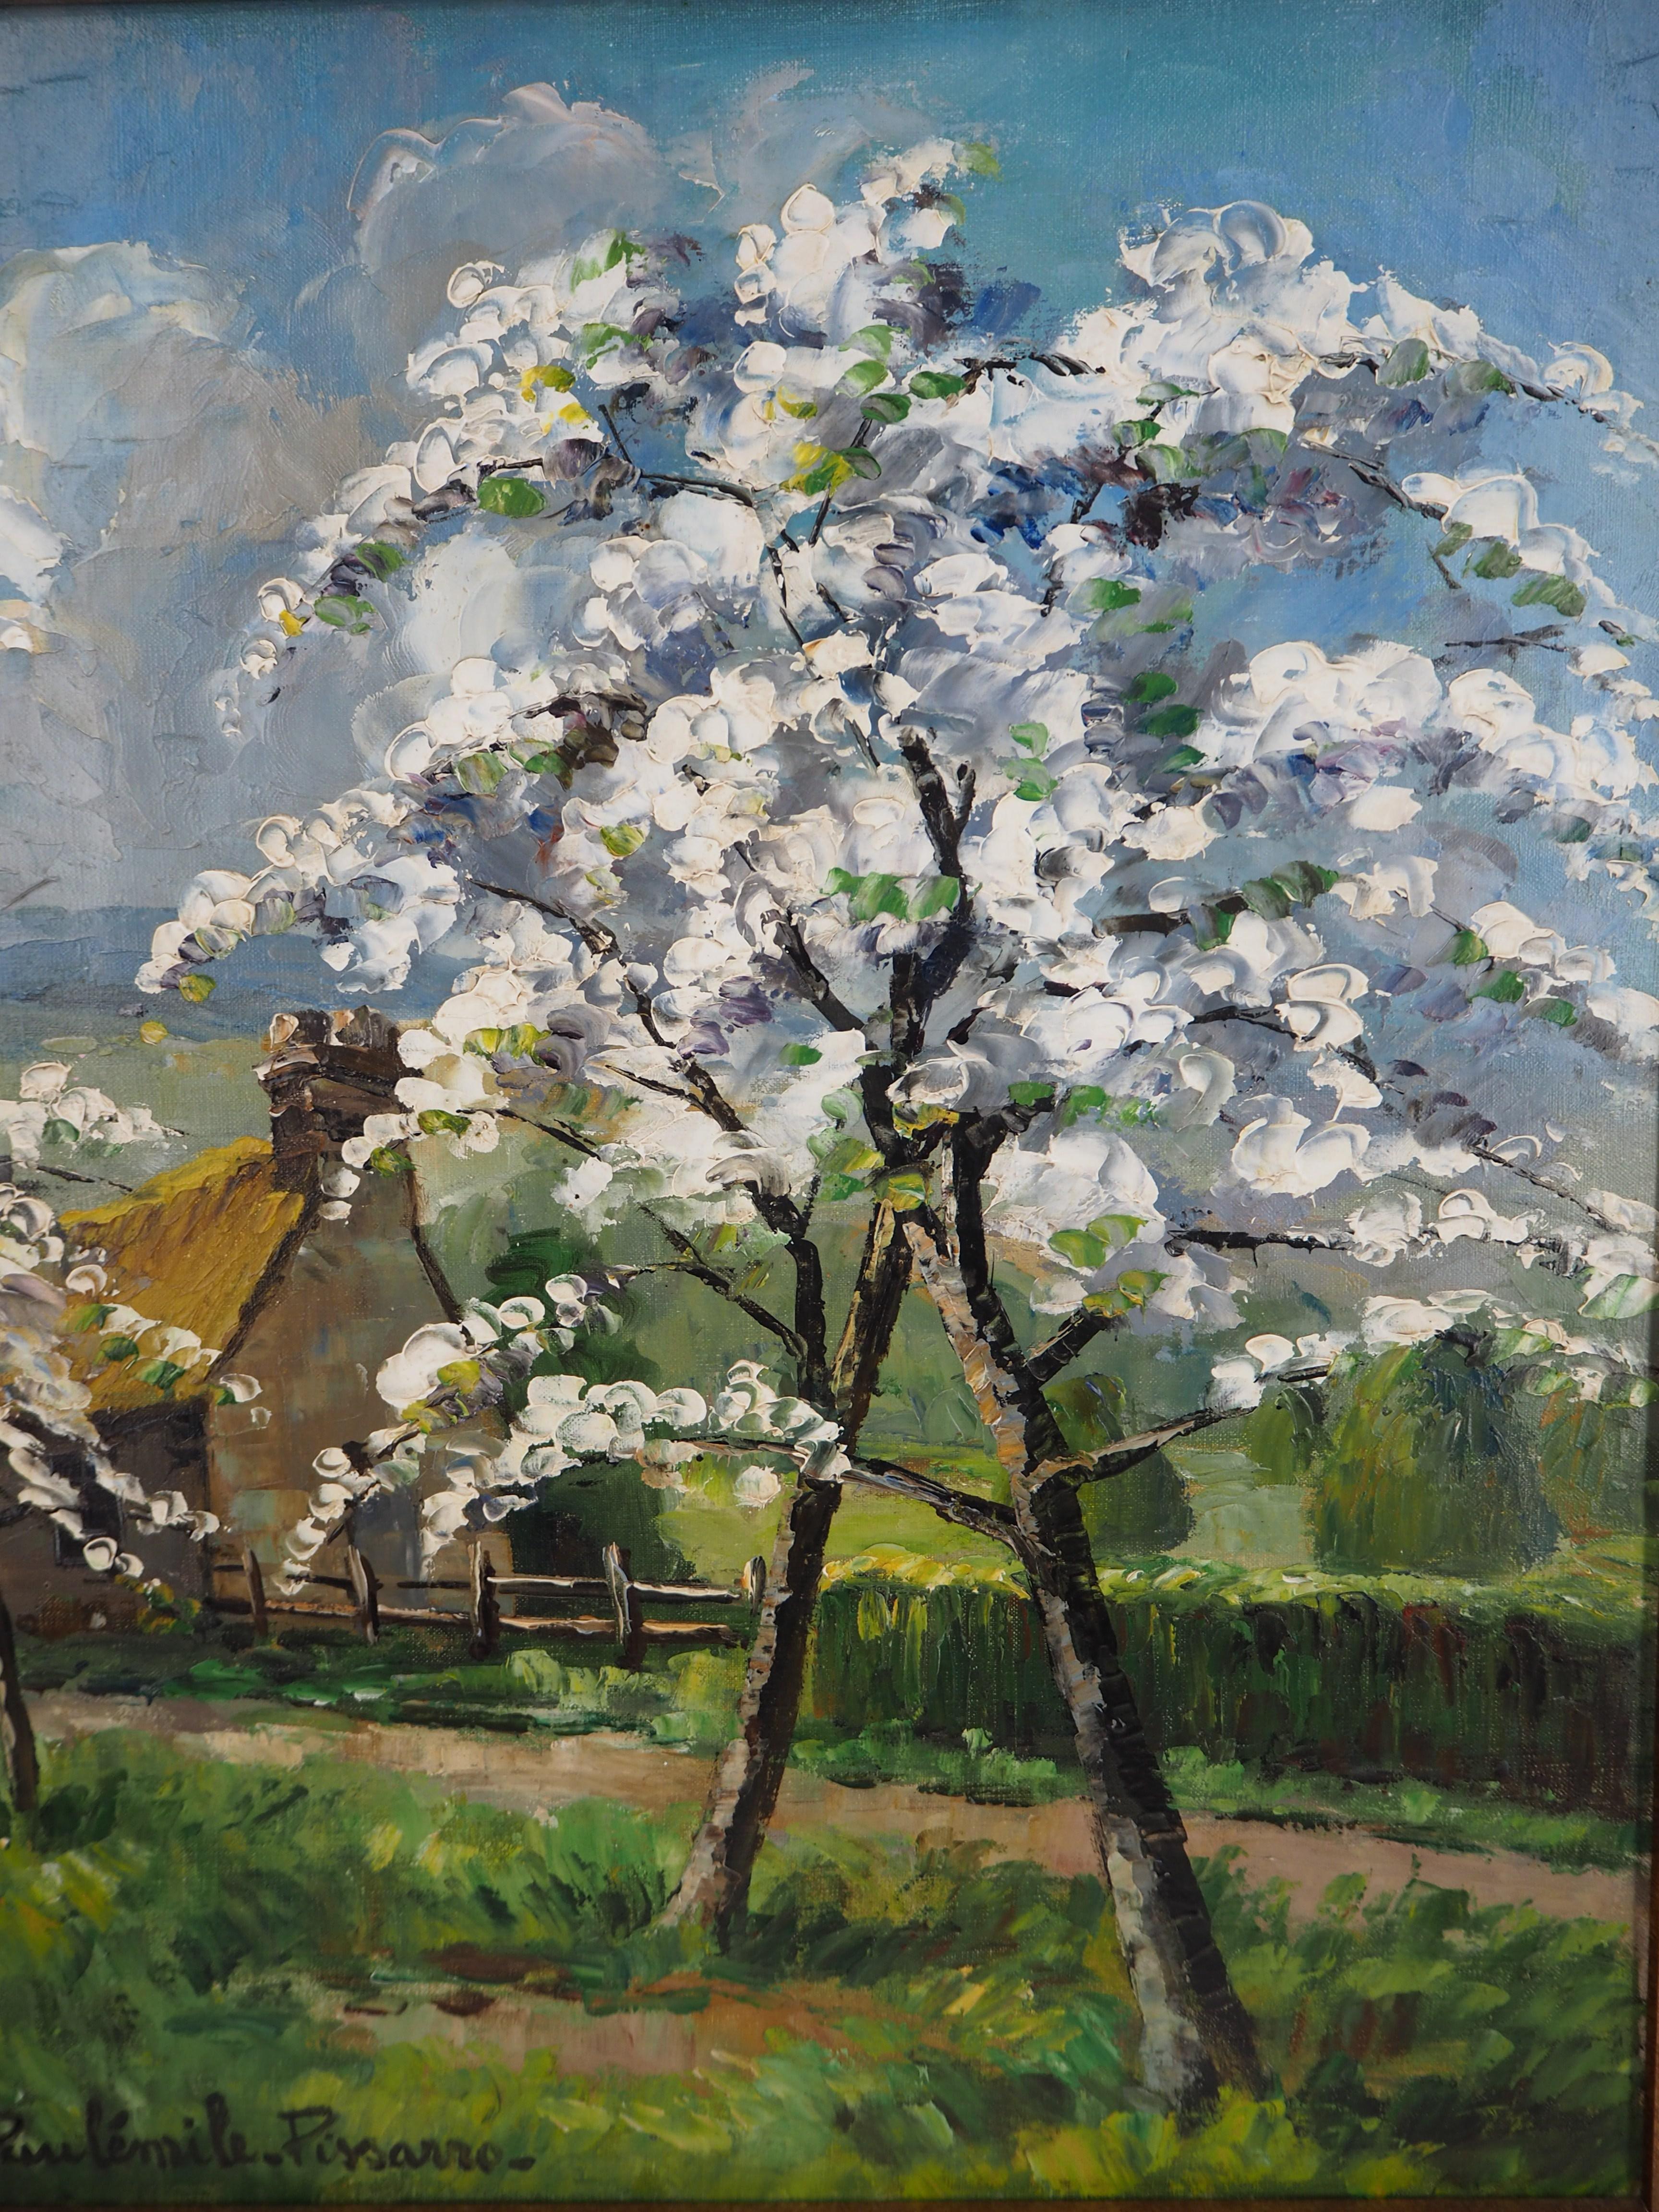 Normandy : Apple Trees in Blossom - Original oil on canvas, Handsigned - Brown Landscape Painting by Paul Emile Pissarro